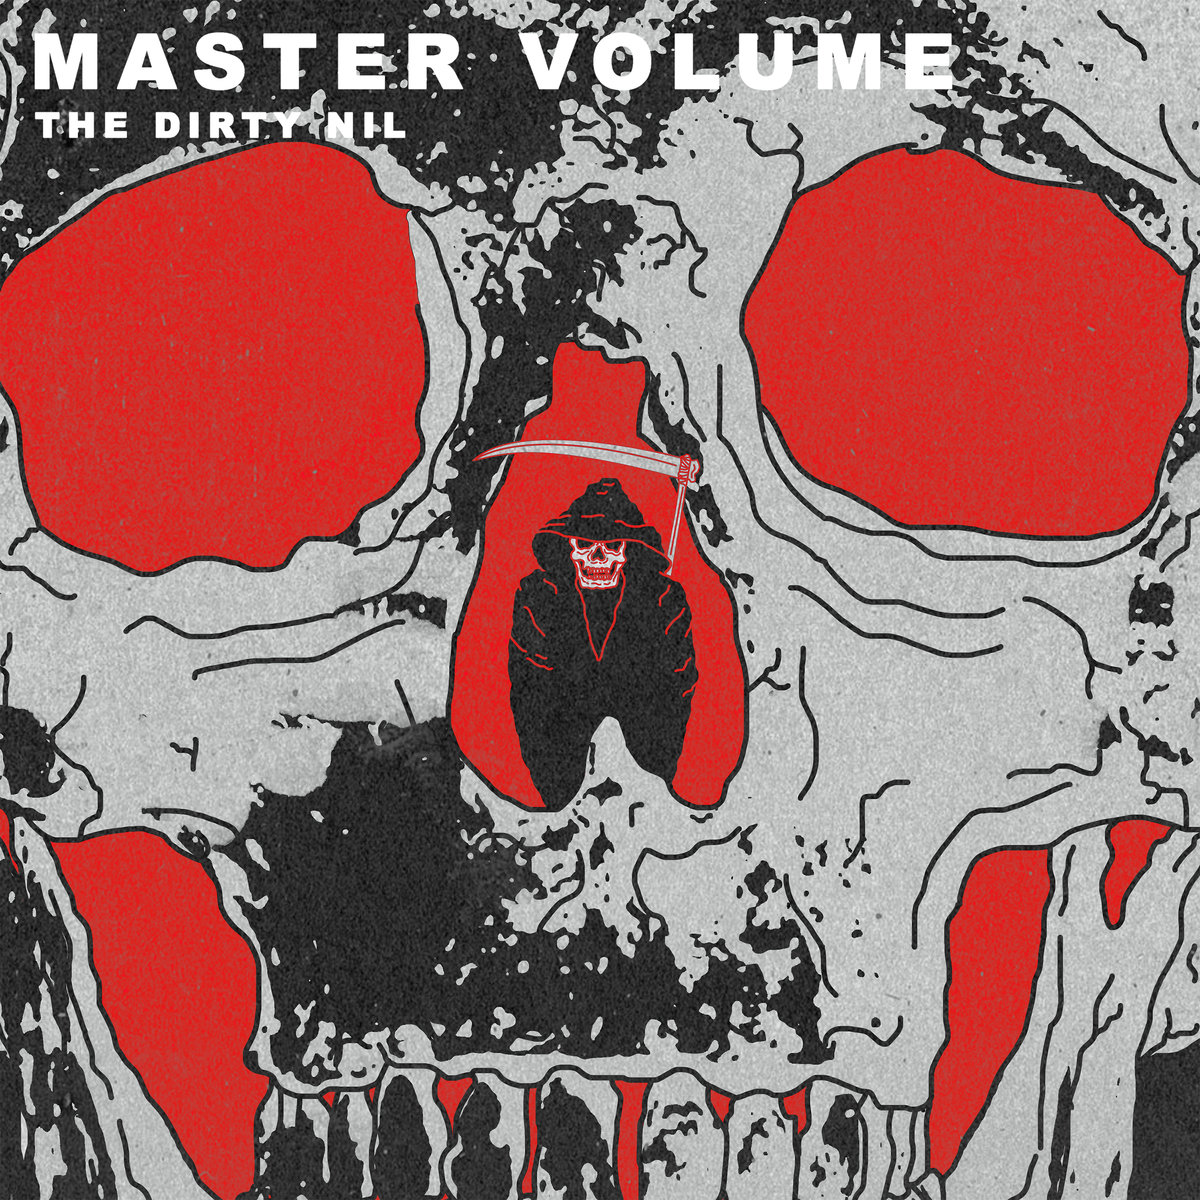 'Master Volume' by The Dirty Nil, album review by Adam Williams.